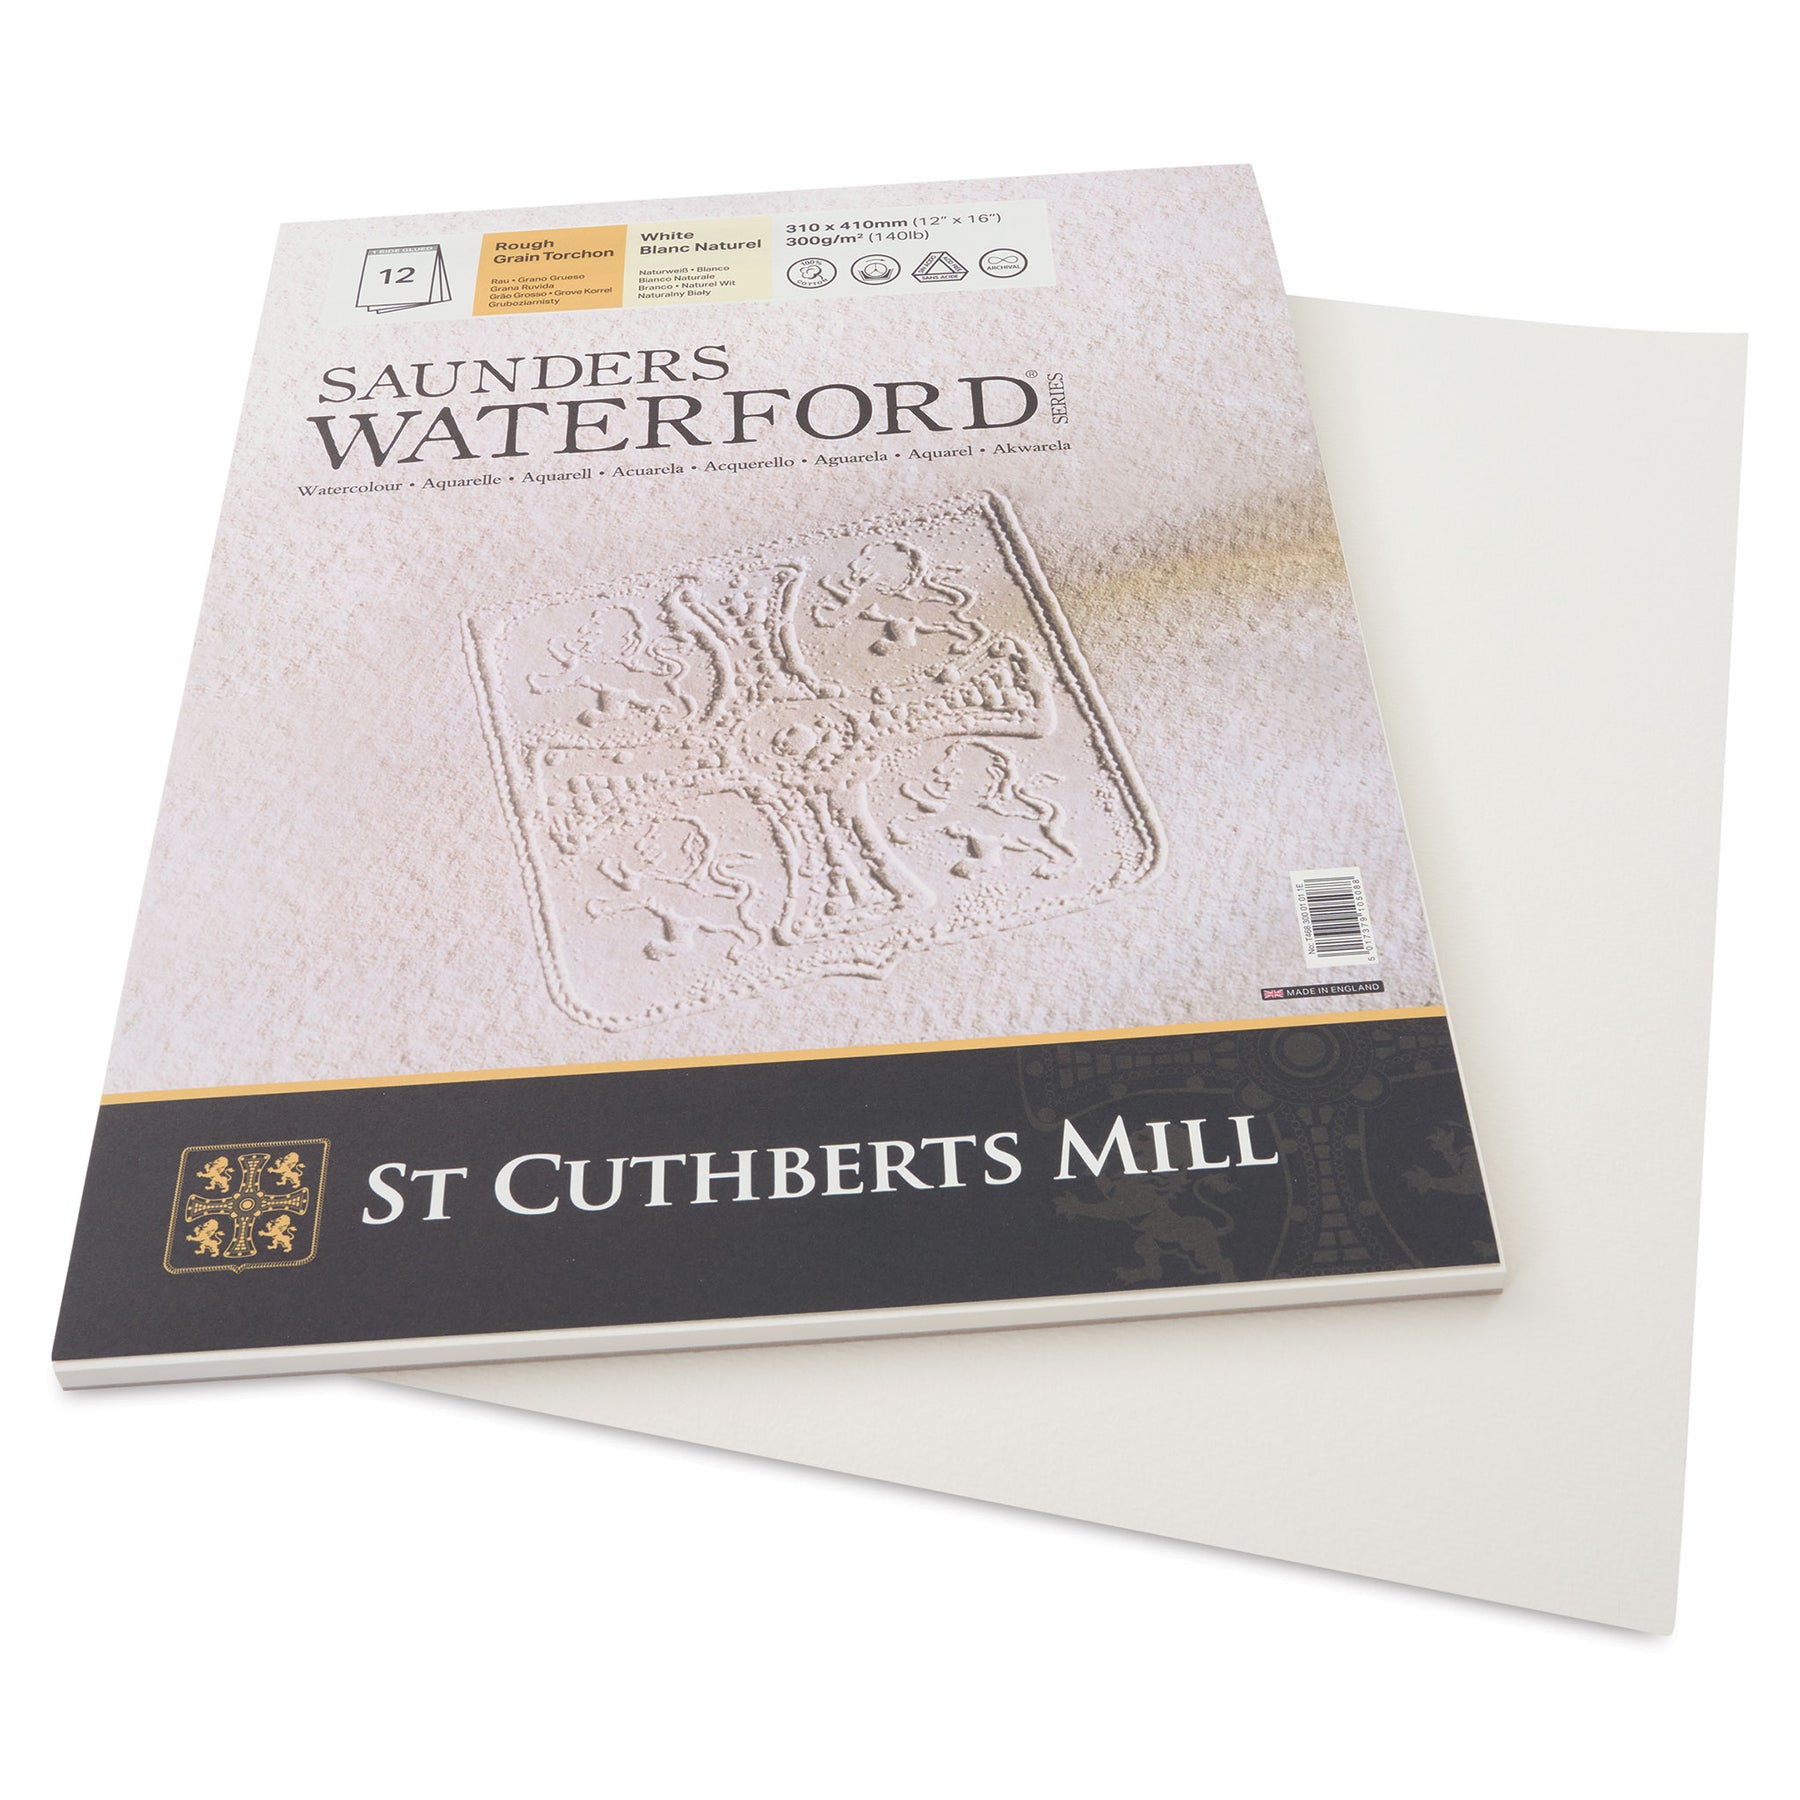 Saunders Waterford Watercolour Paper Pads (Cold Pressed) Open